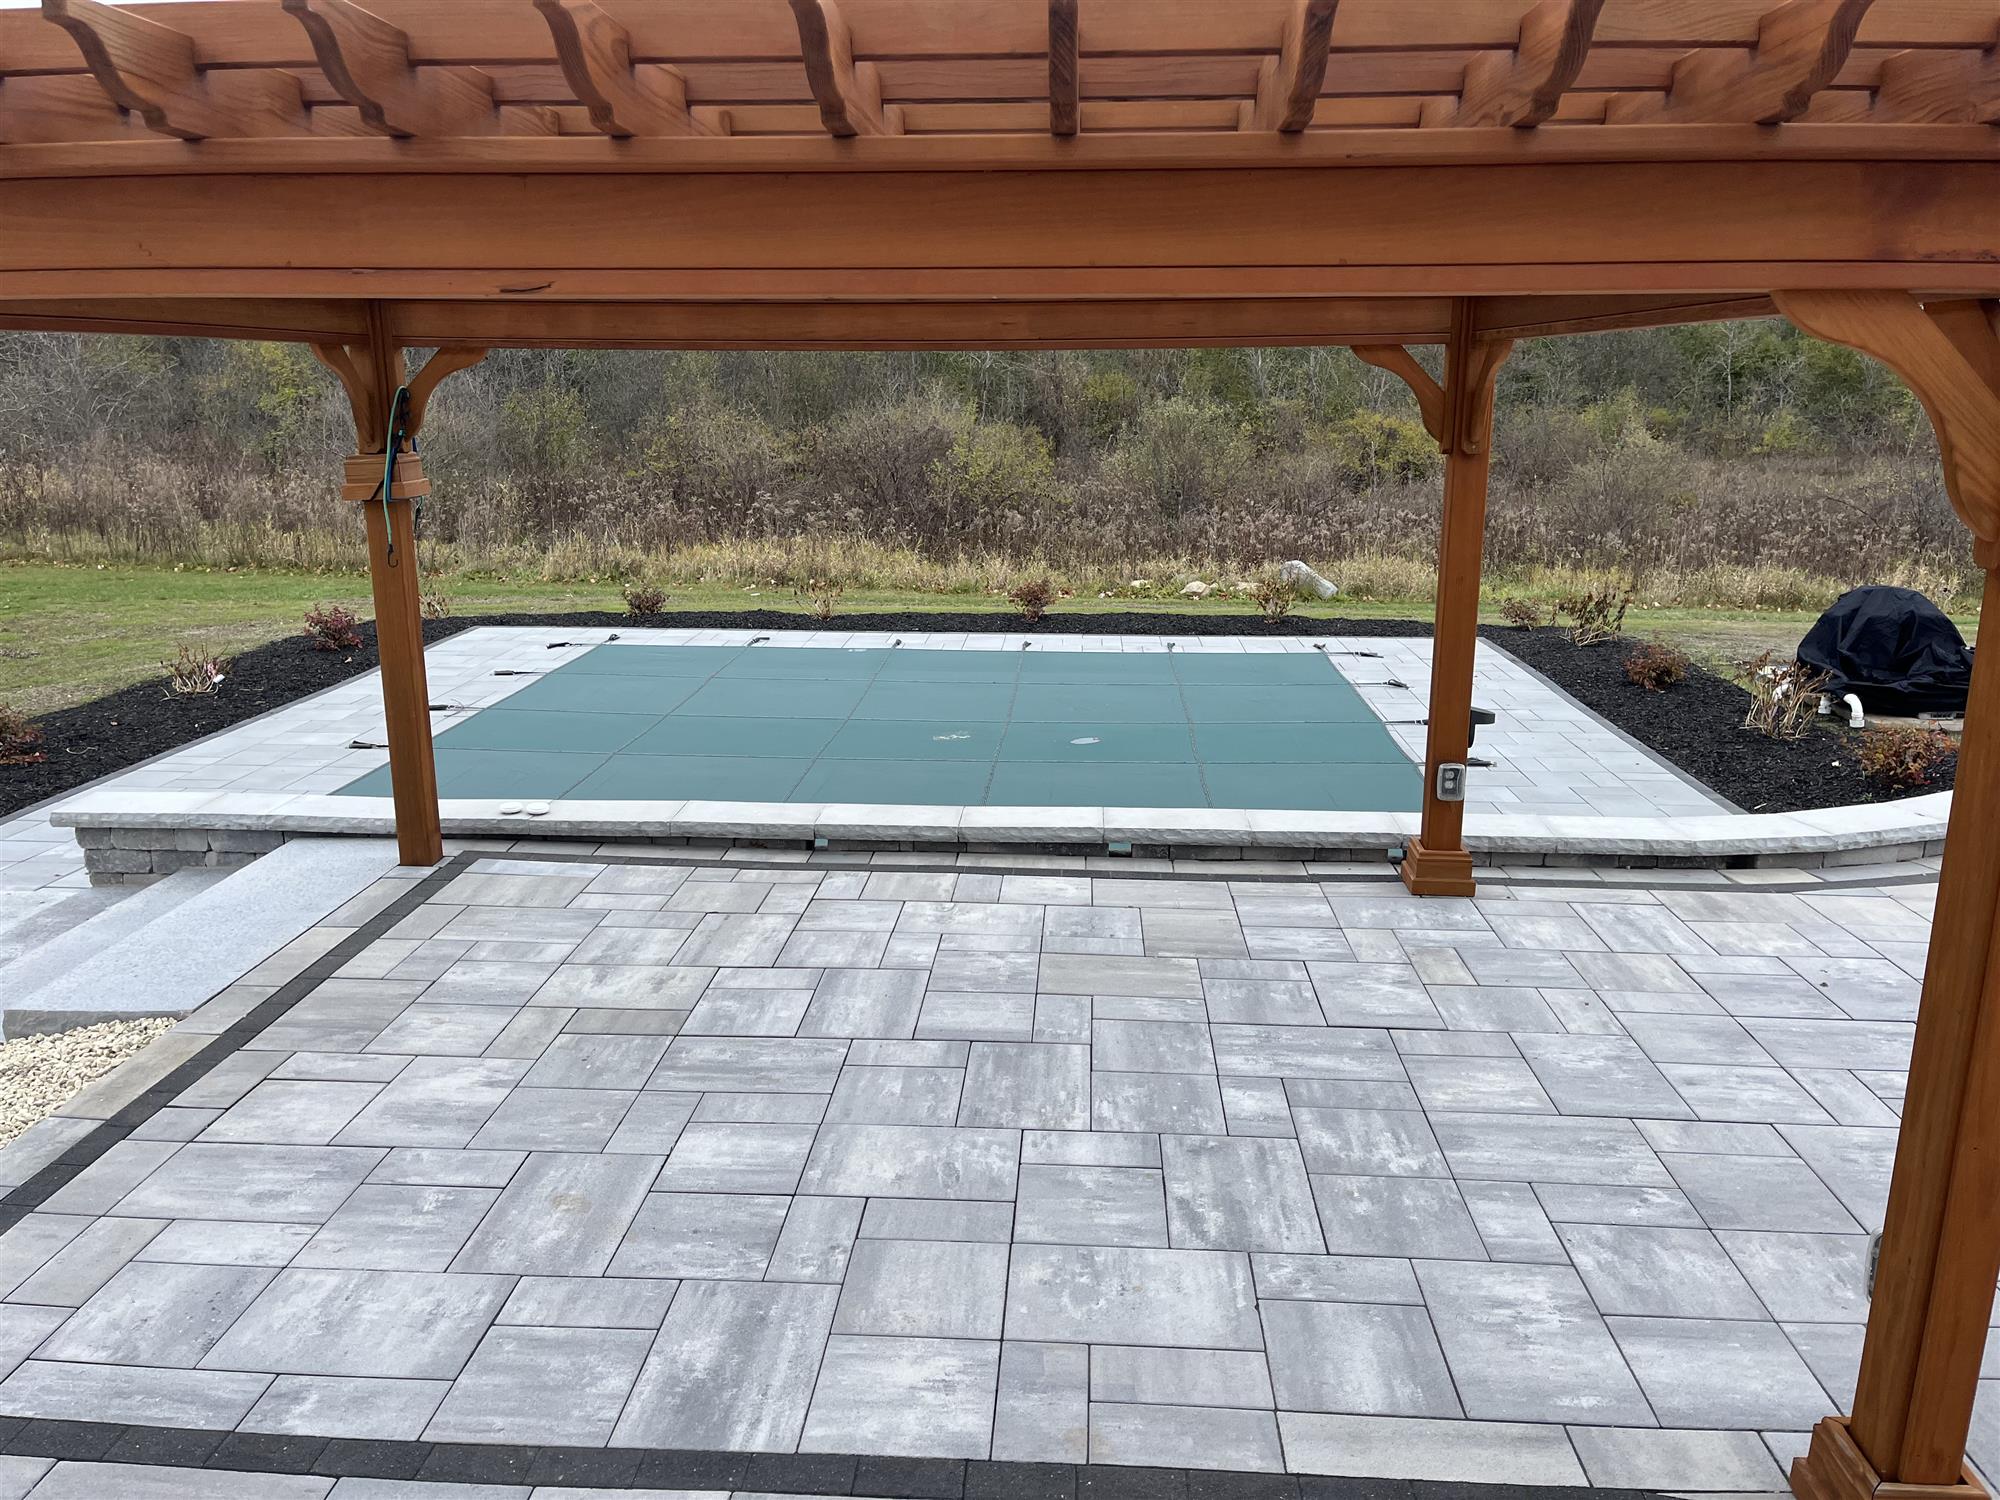 EcoPool Surrounded by a Patio with Retaining Walls and a Pergola